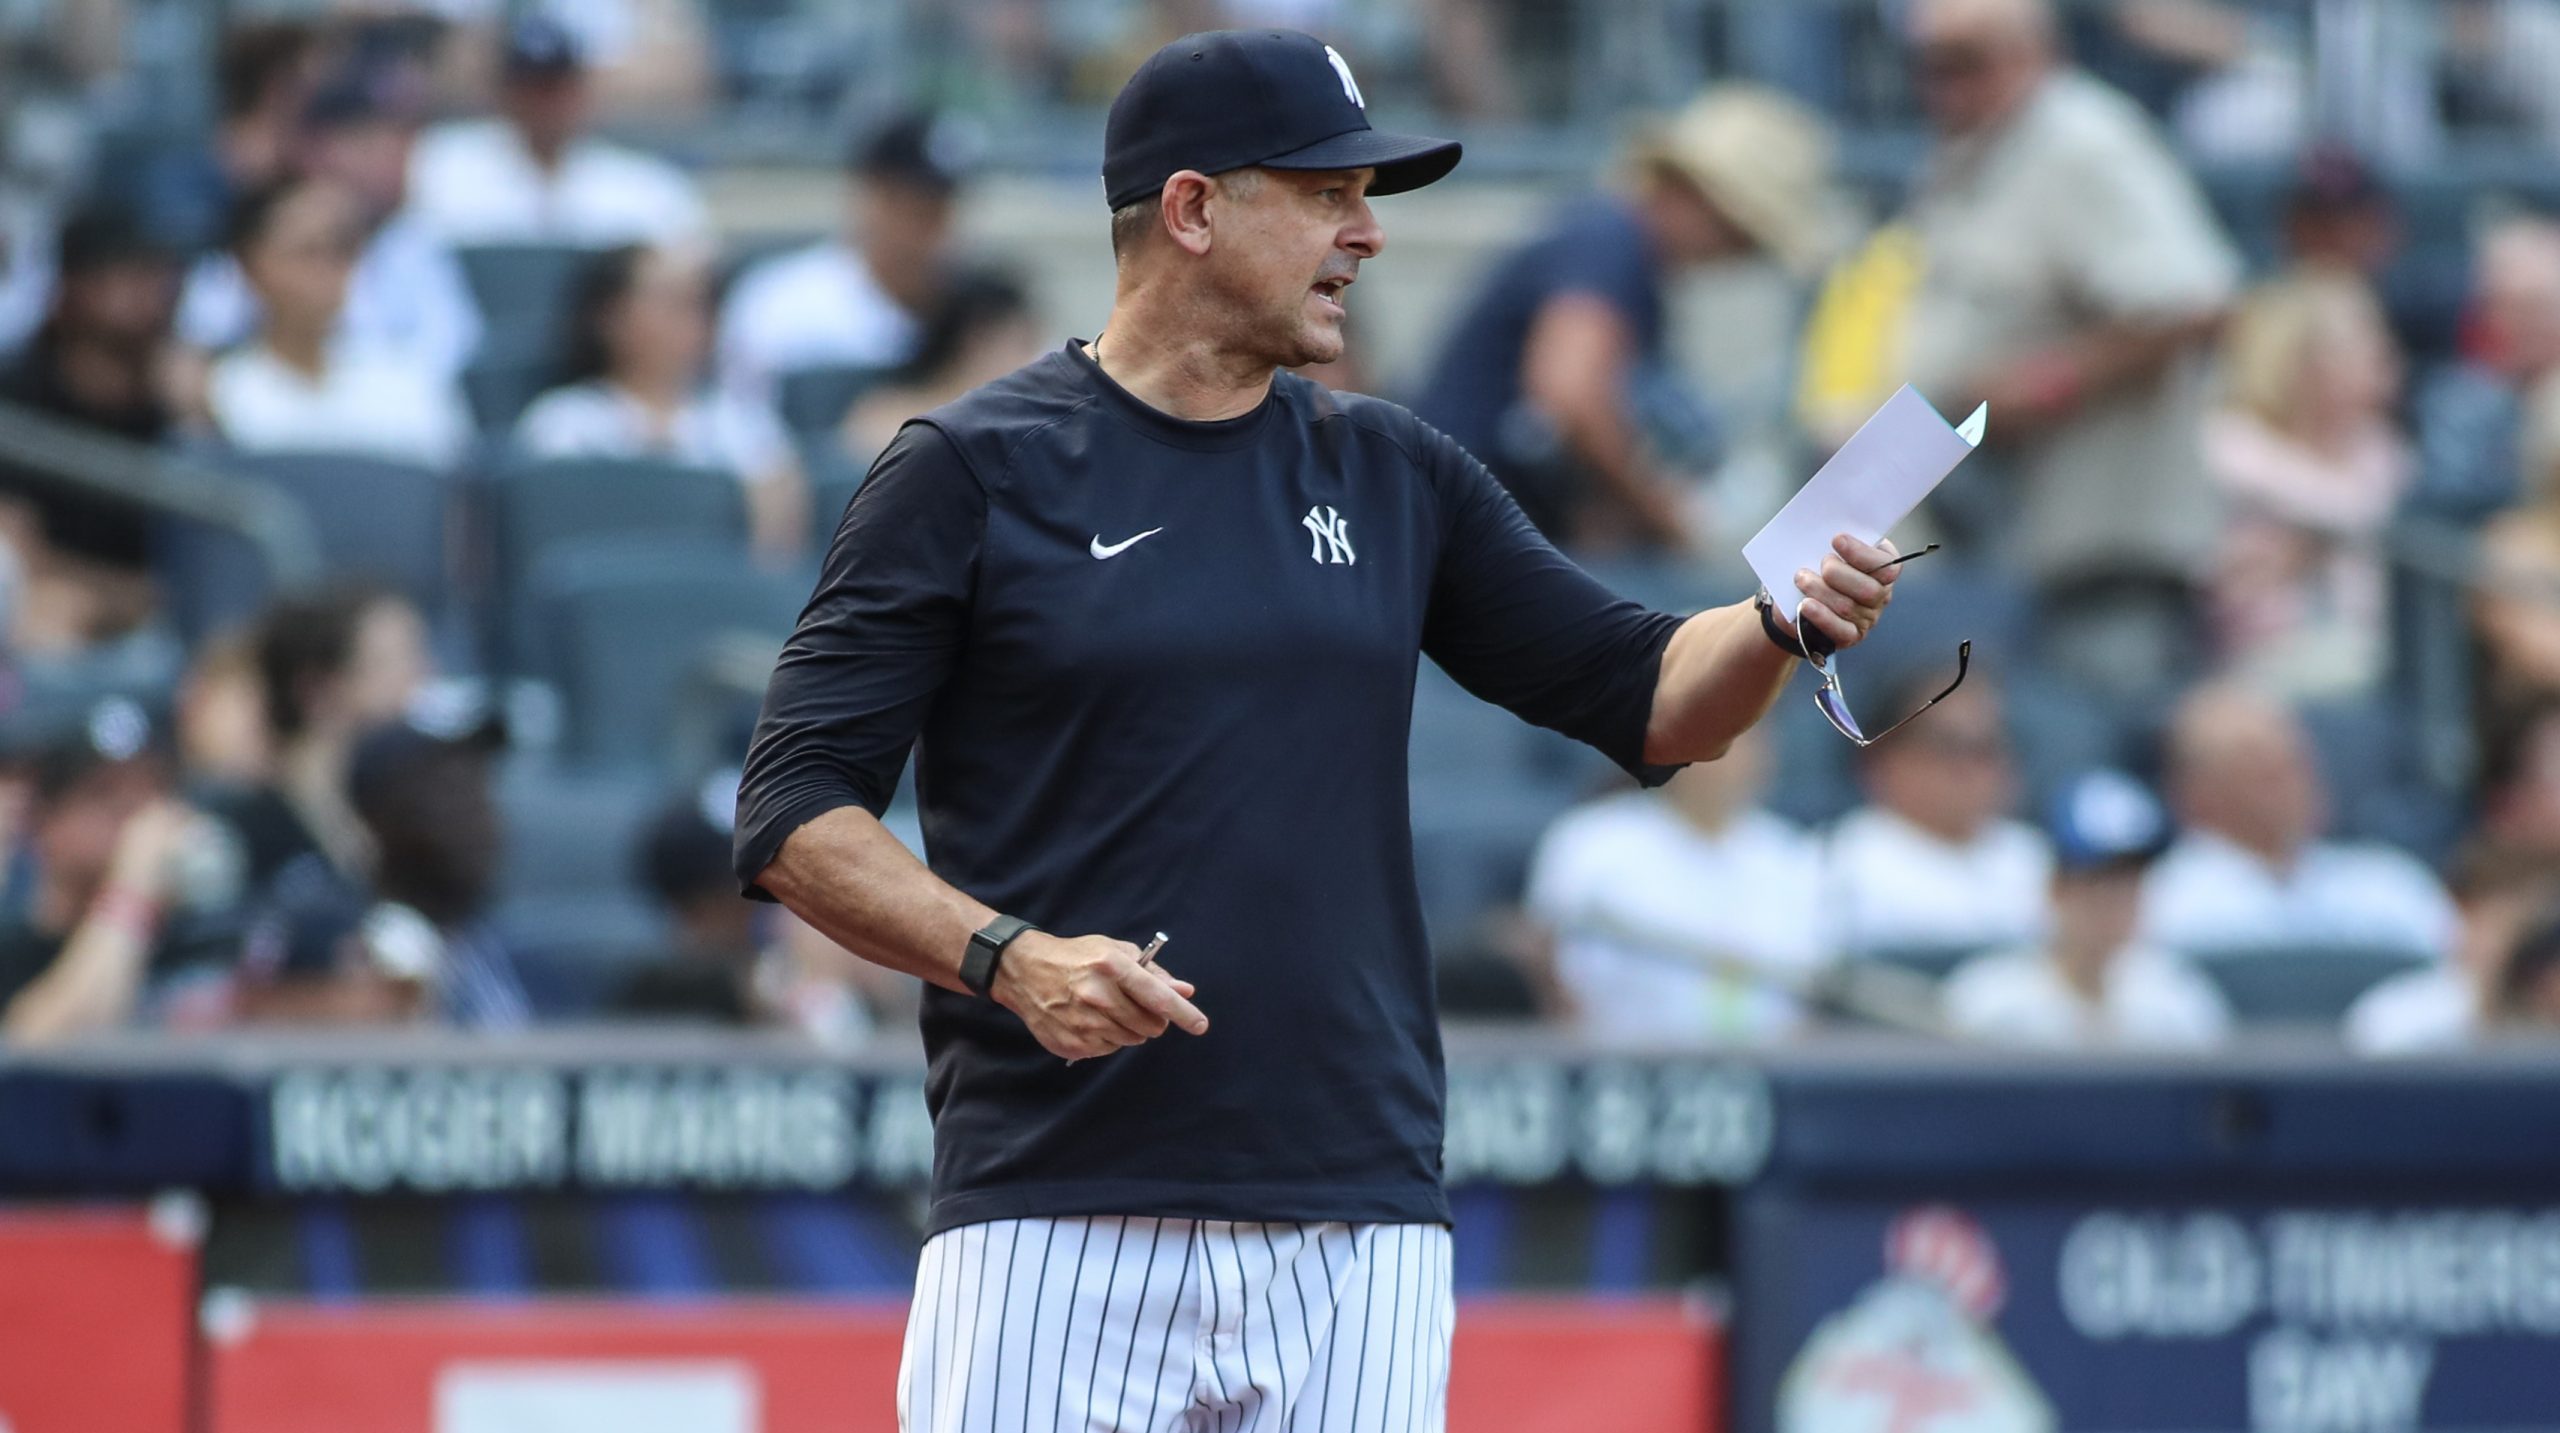 While Aaron Boone has generally kept a positive outlook on the Yankees, that was not the case after Sunday's loss to the Red Sox. Photo Credit: Wendell Cruz-USA TODAY Sports